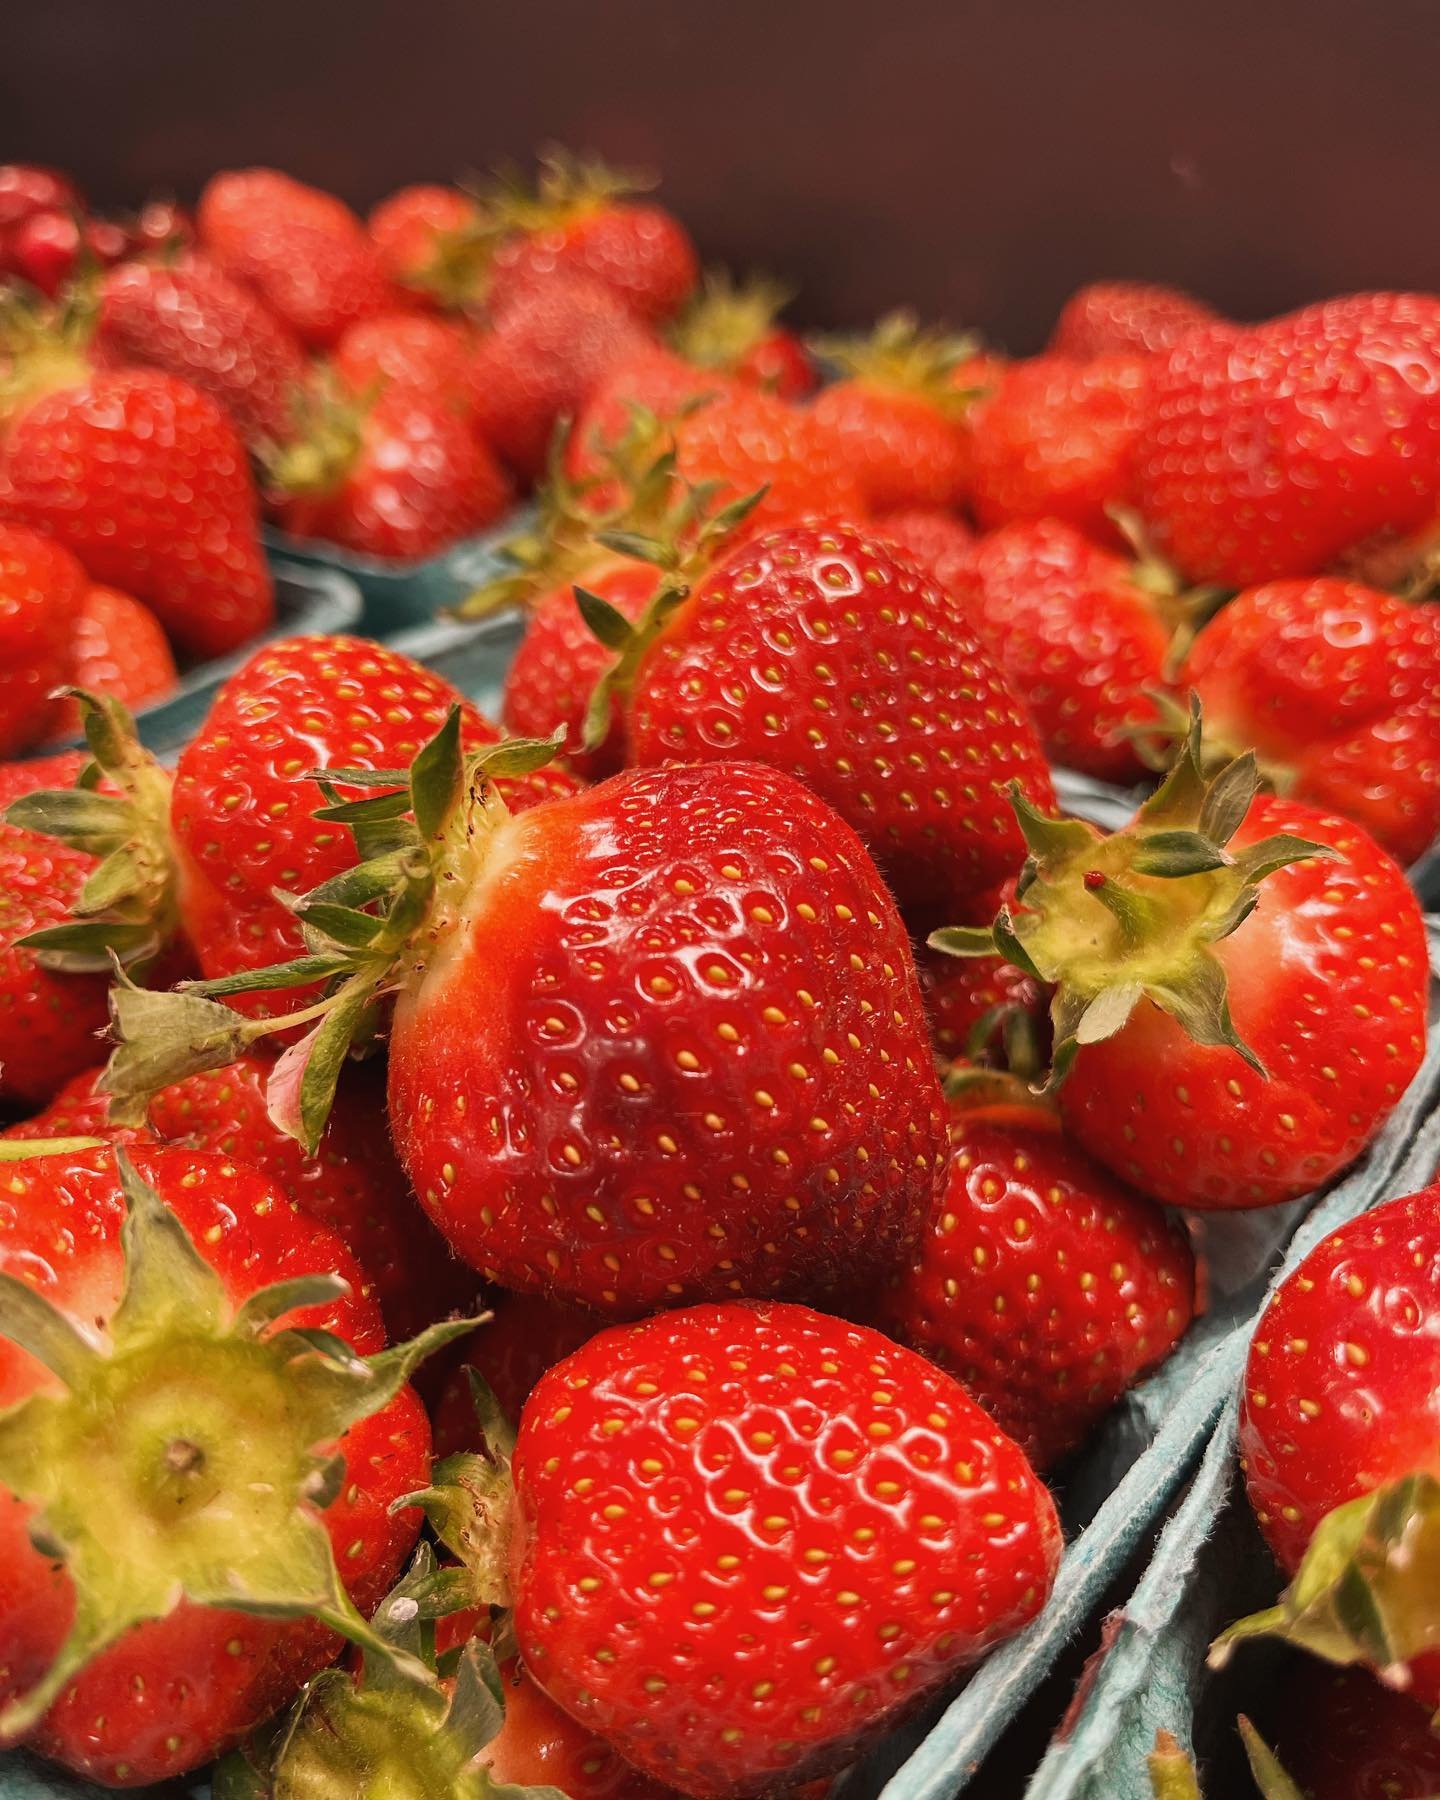 LOCAL strawberries are here! Stop by for your first taste of summer&rsquo;s best!
We are here till 5:00pm today.  #freshlocalstrawberries #localproduce